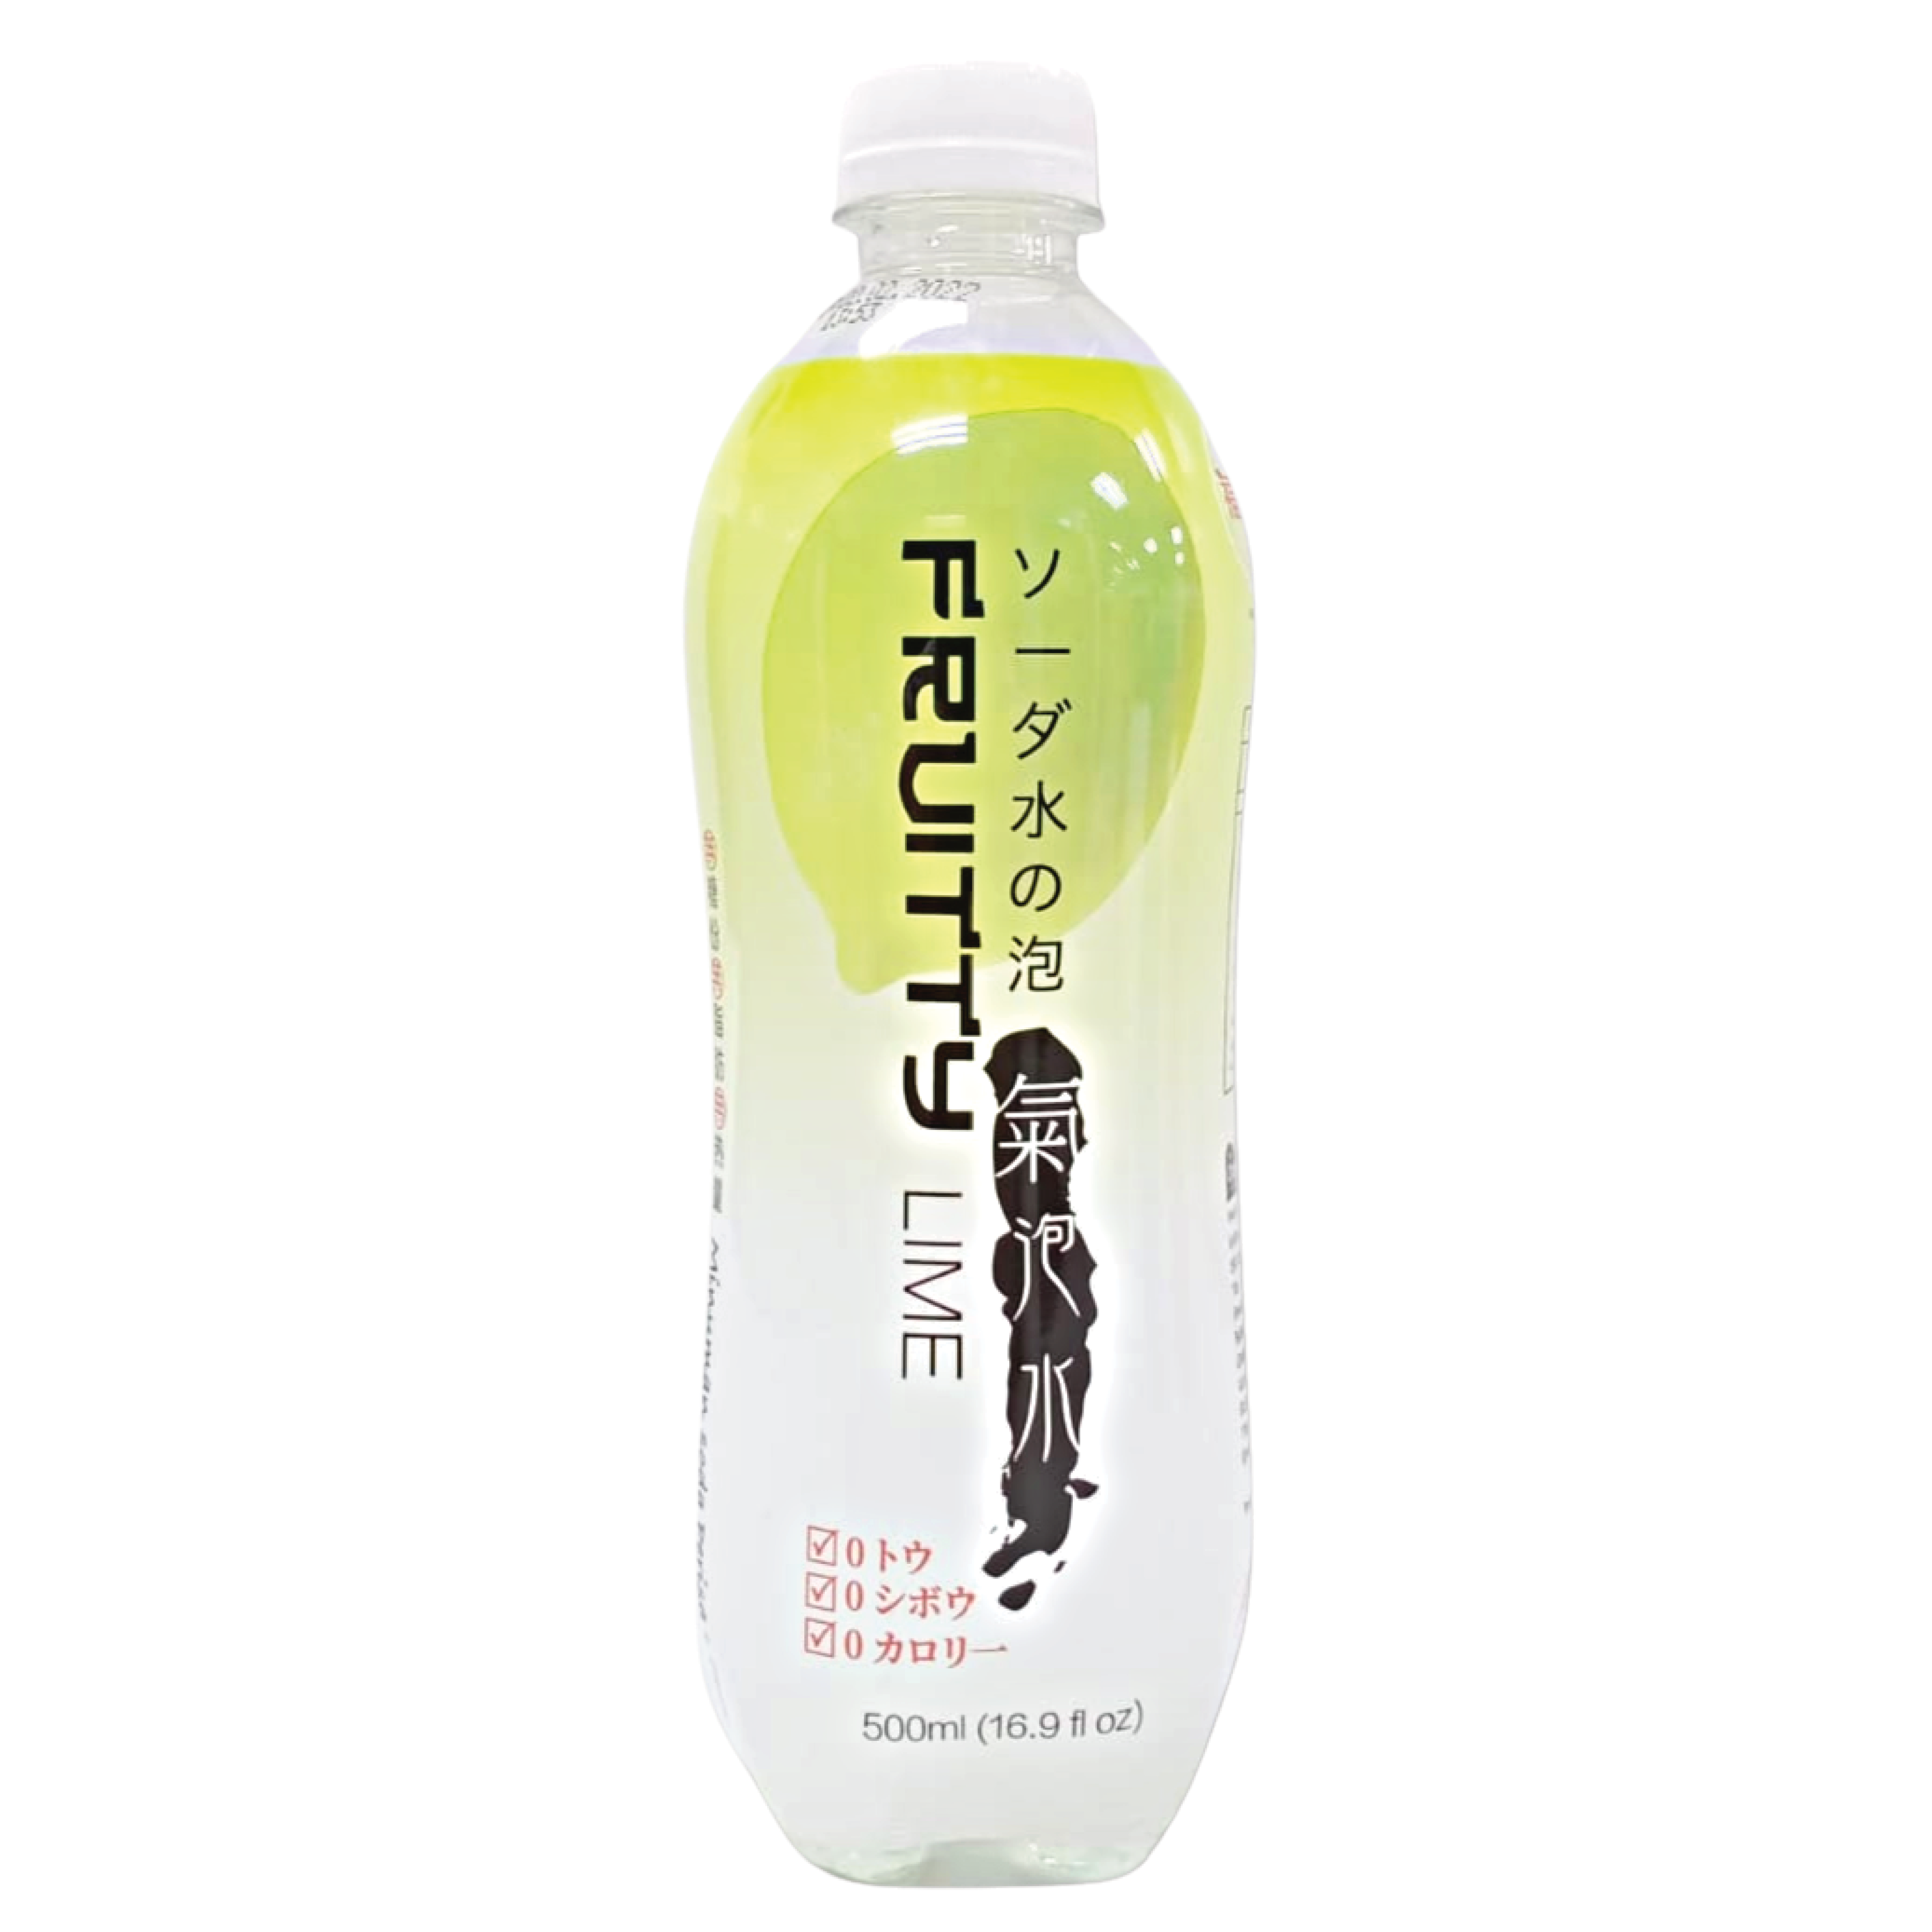 Pere Ocean Fruitty Sparkling Soda Lime Flavoured Water 500ml